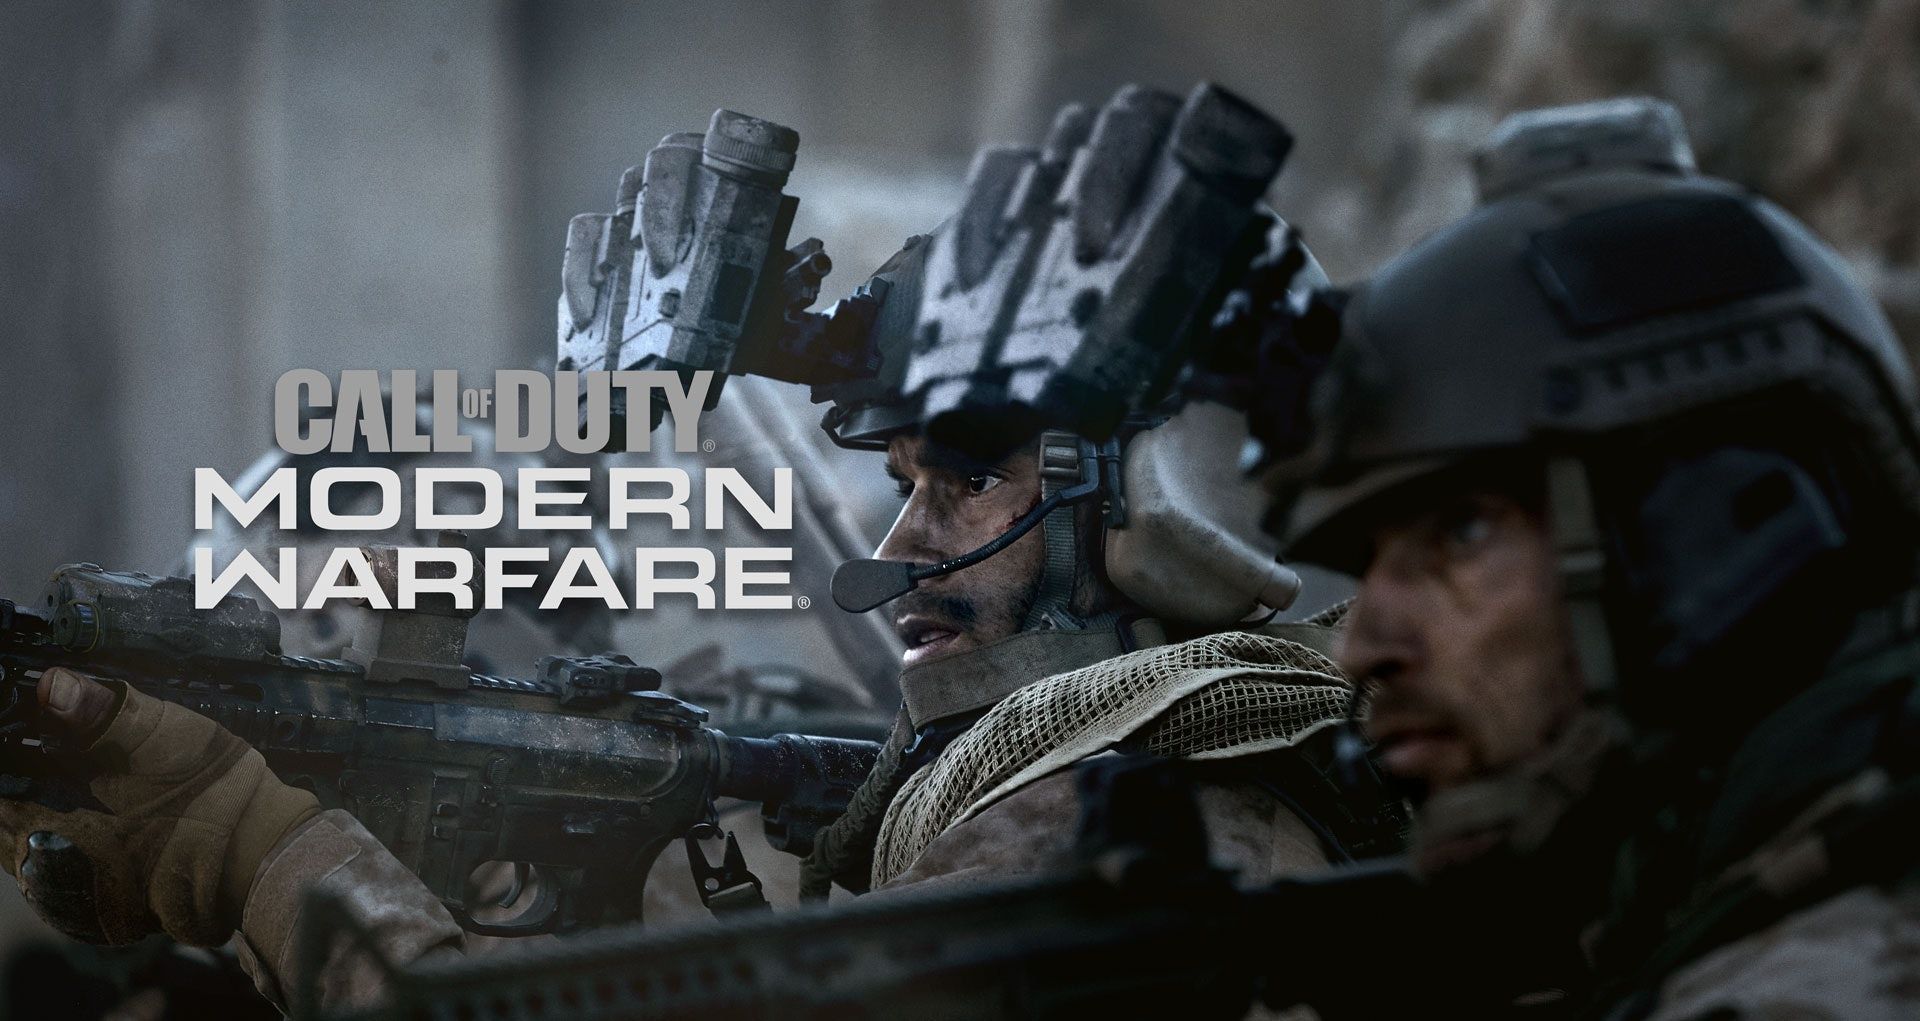 Call of Duty: Modern Warfare': 5 essential facts for getting started